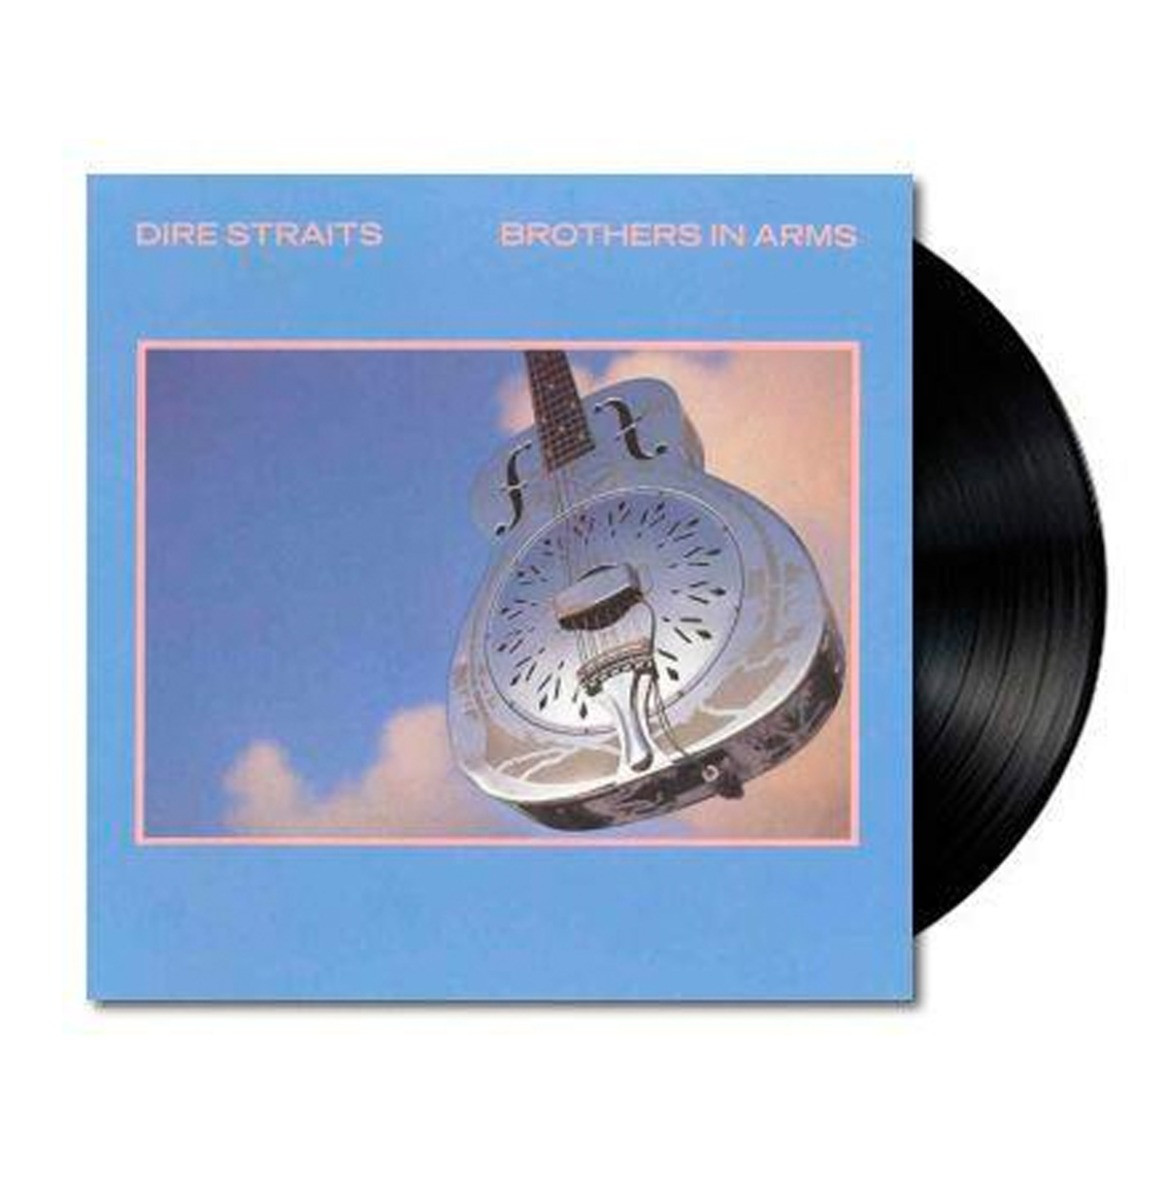 Dire Straits - Brothers In Arms 2 LP